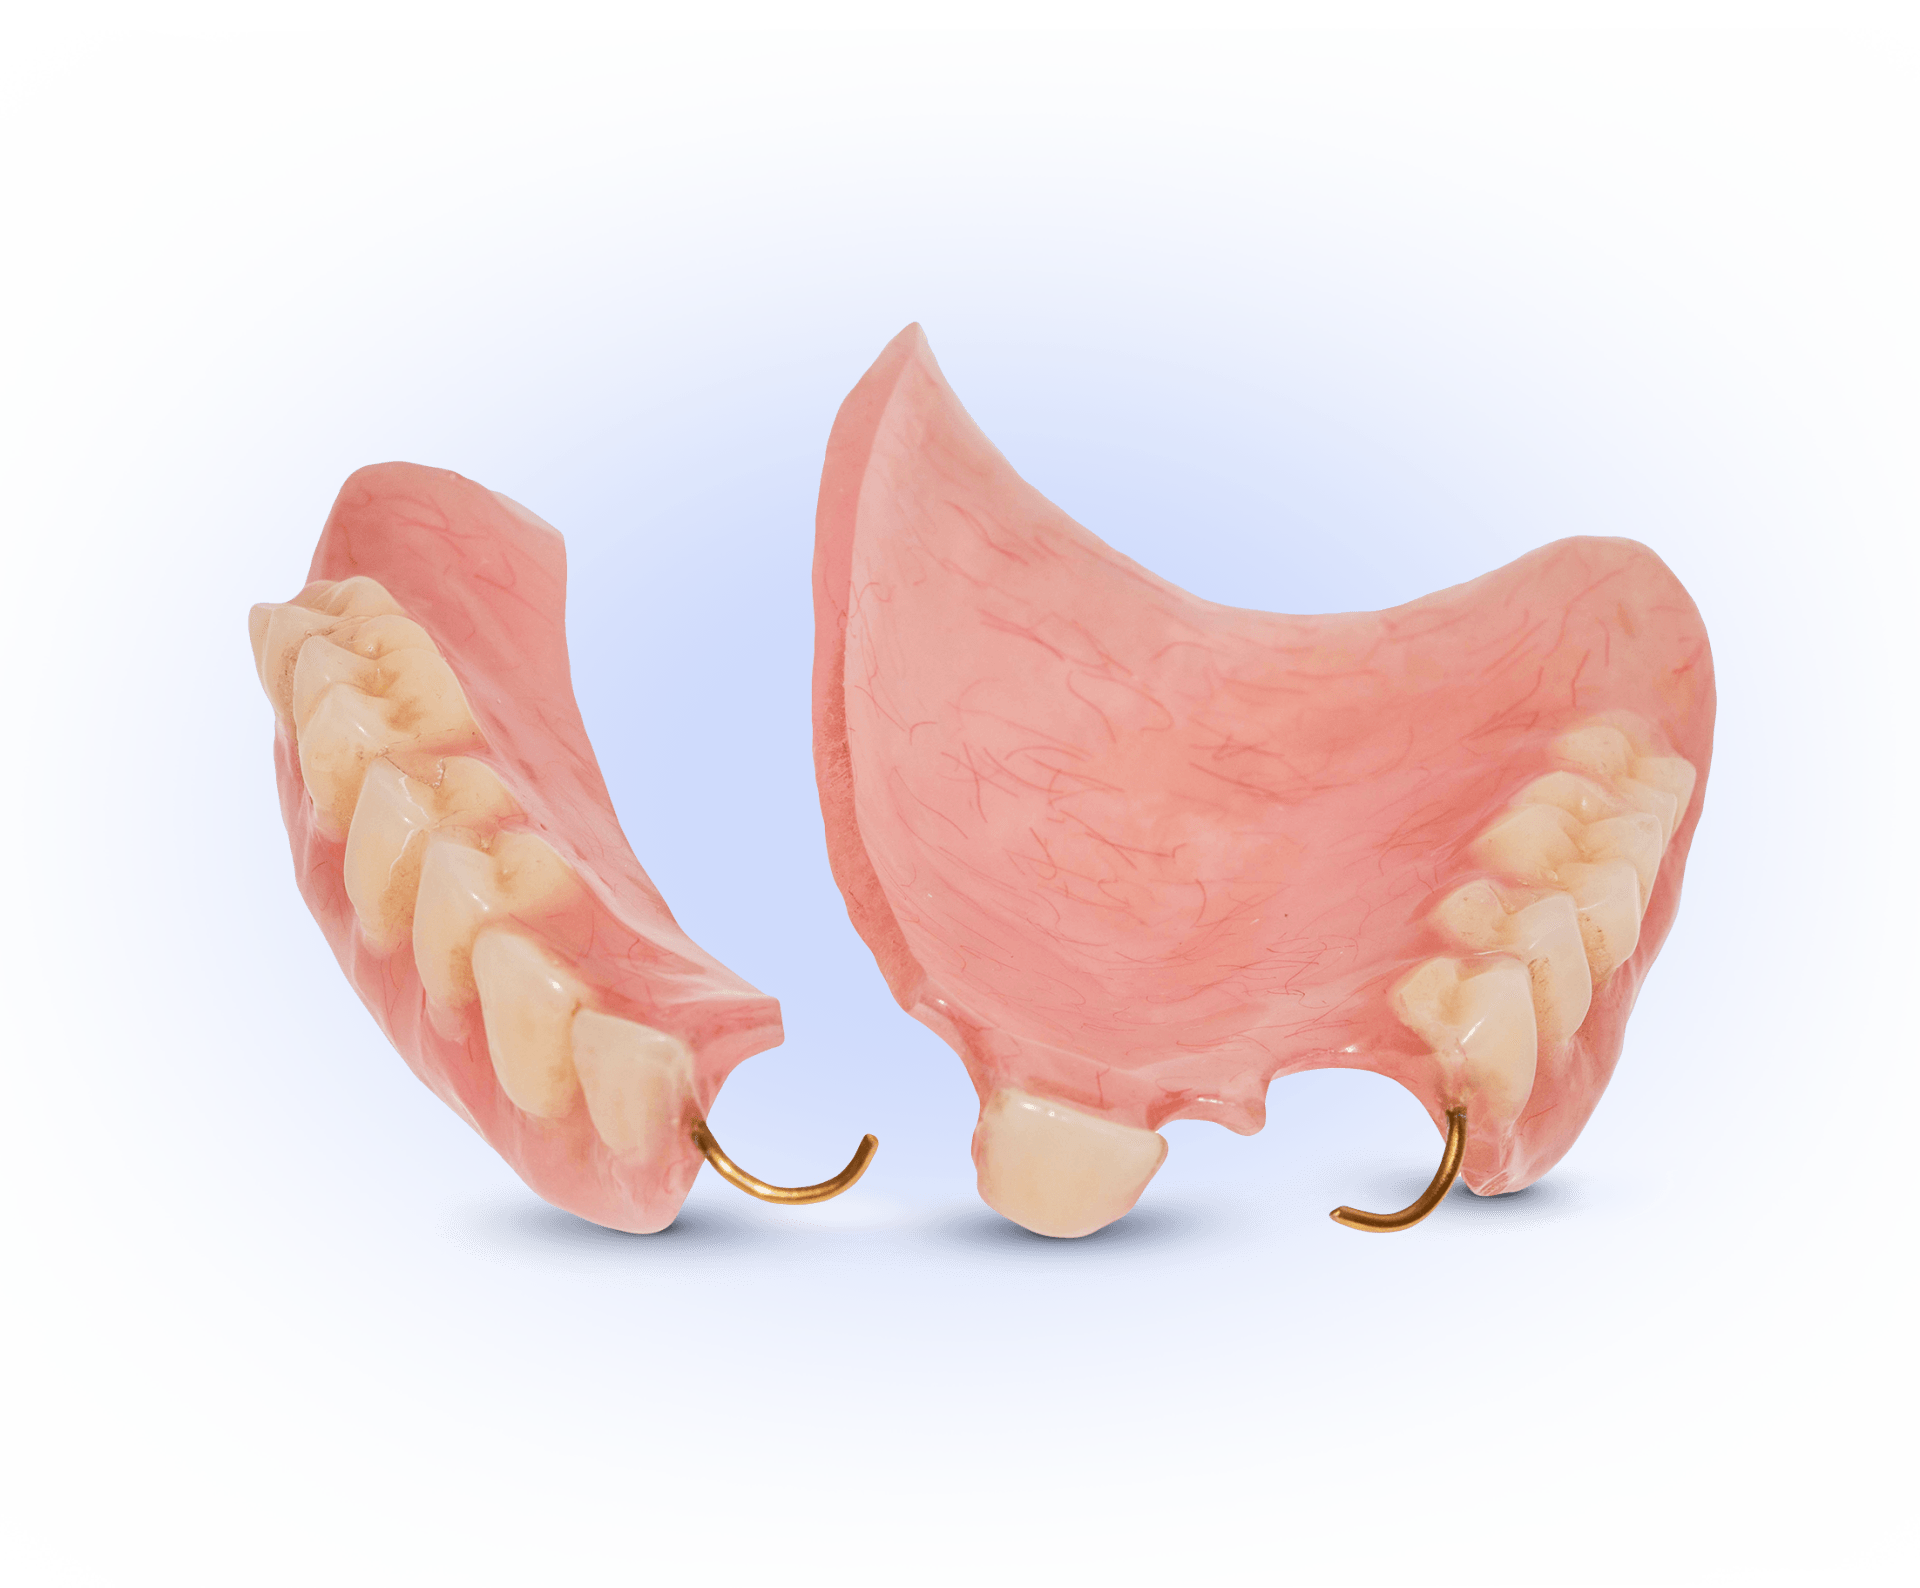 A close up of a denture on a white background